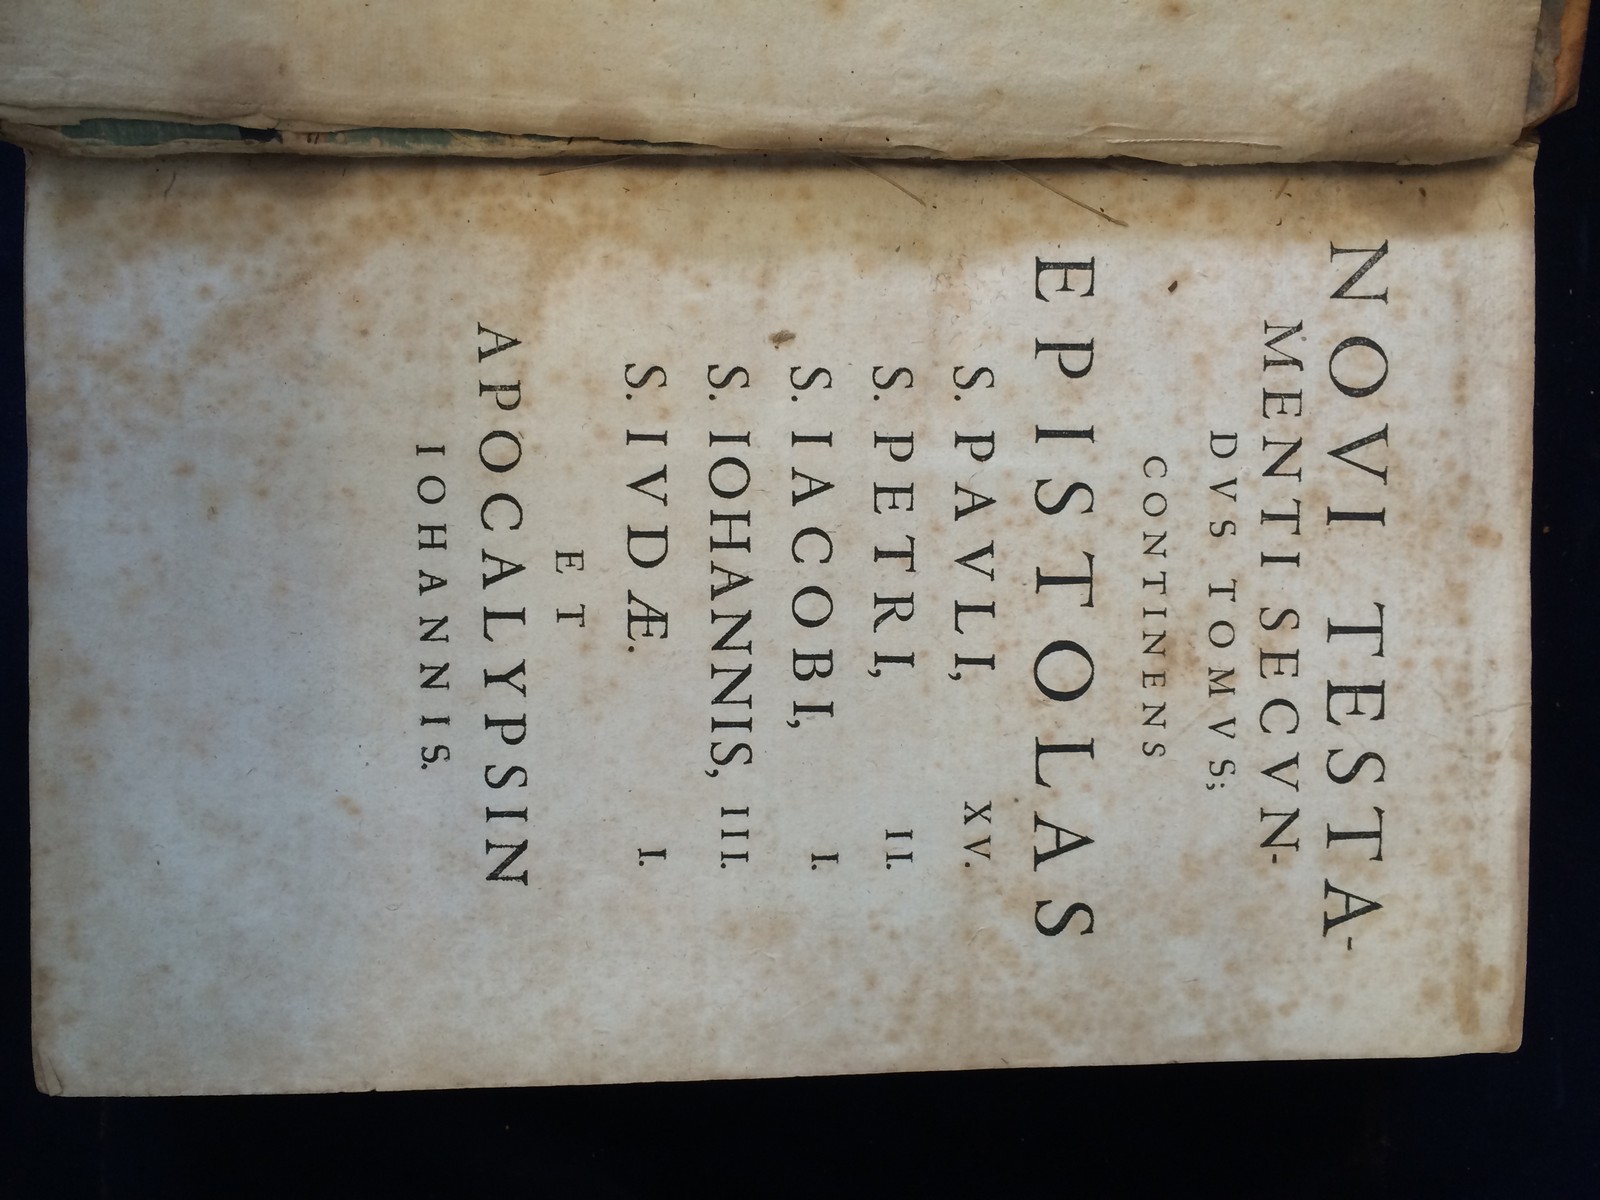 "The Elias Hutter Polyglot Bible" - both volumes, first edition printed 1599.  The New Testament - Image 5 of 6